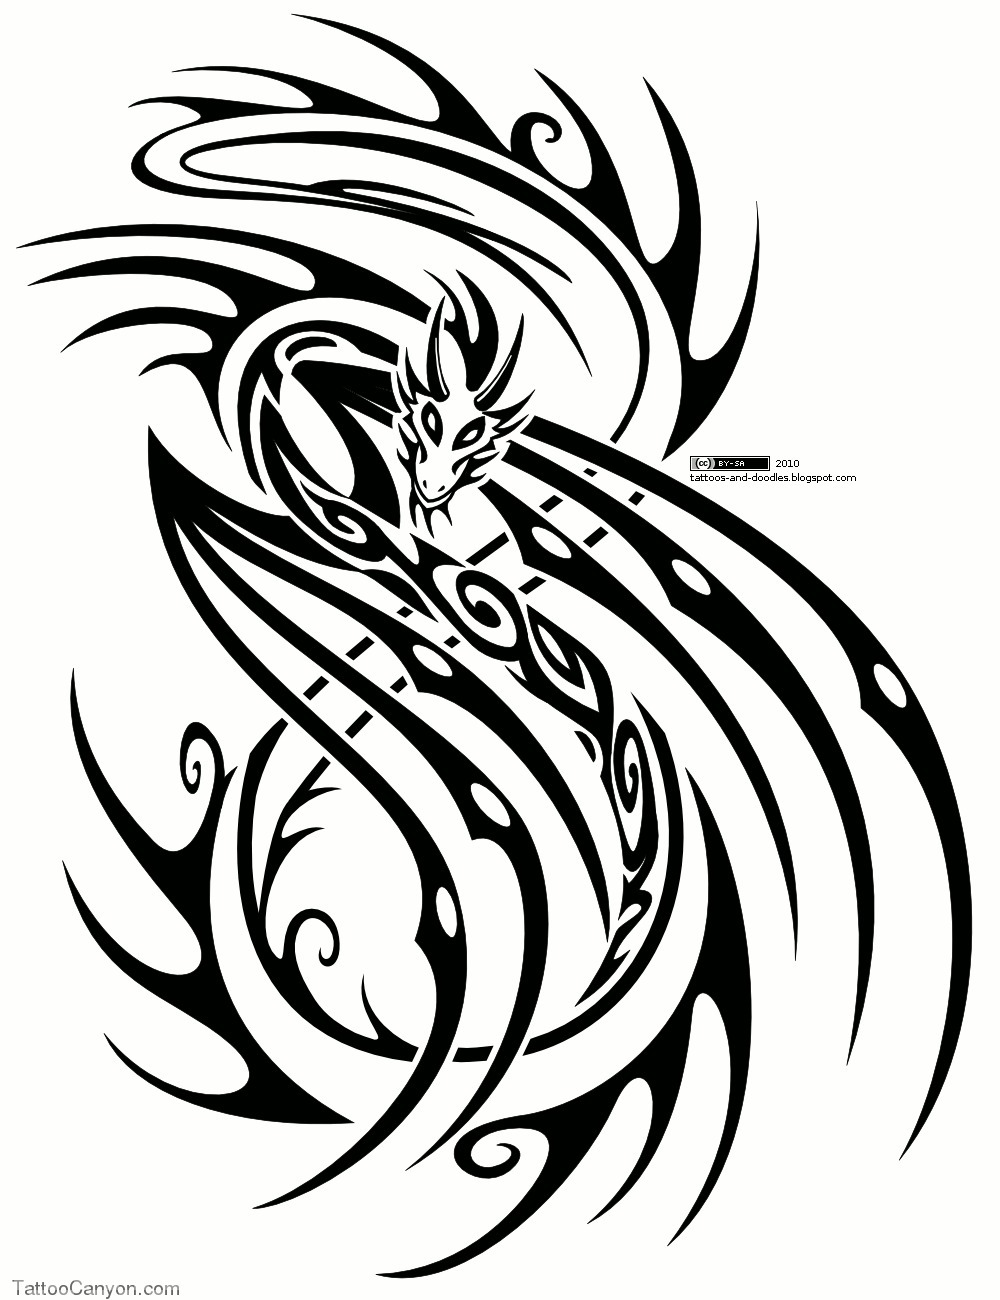 Dragon Tattoo Design Free Download 7350 Tribal Picture # - ClipArt ...